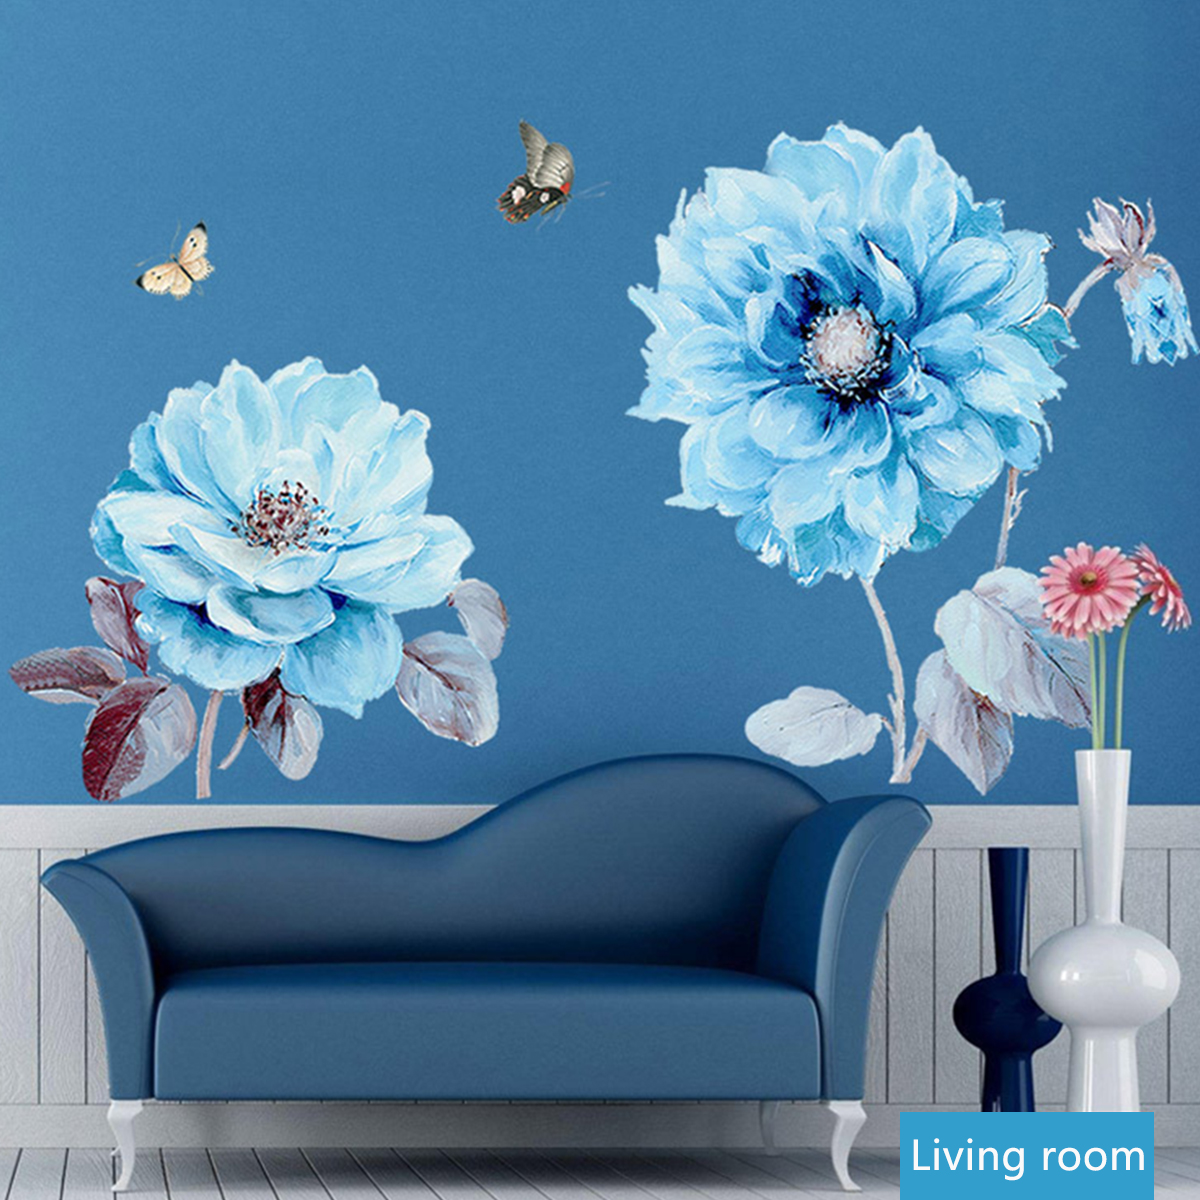 Blue-Flowers-Wall-Sticker-Room-Sticker-Living-Room-Background-Bedroom-Decorations-1524262-6